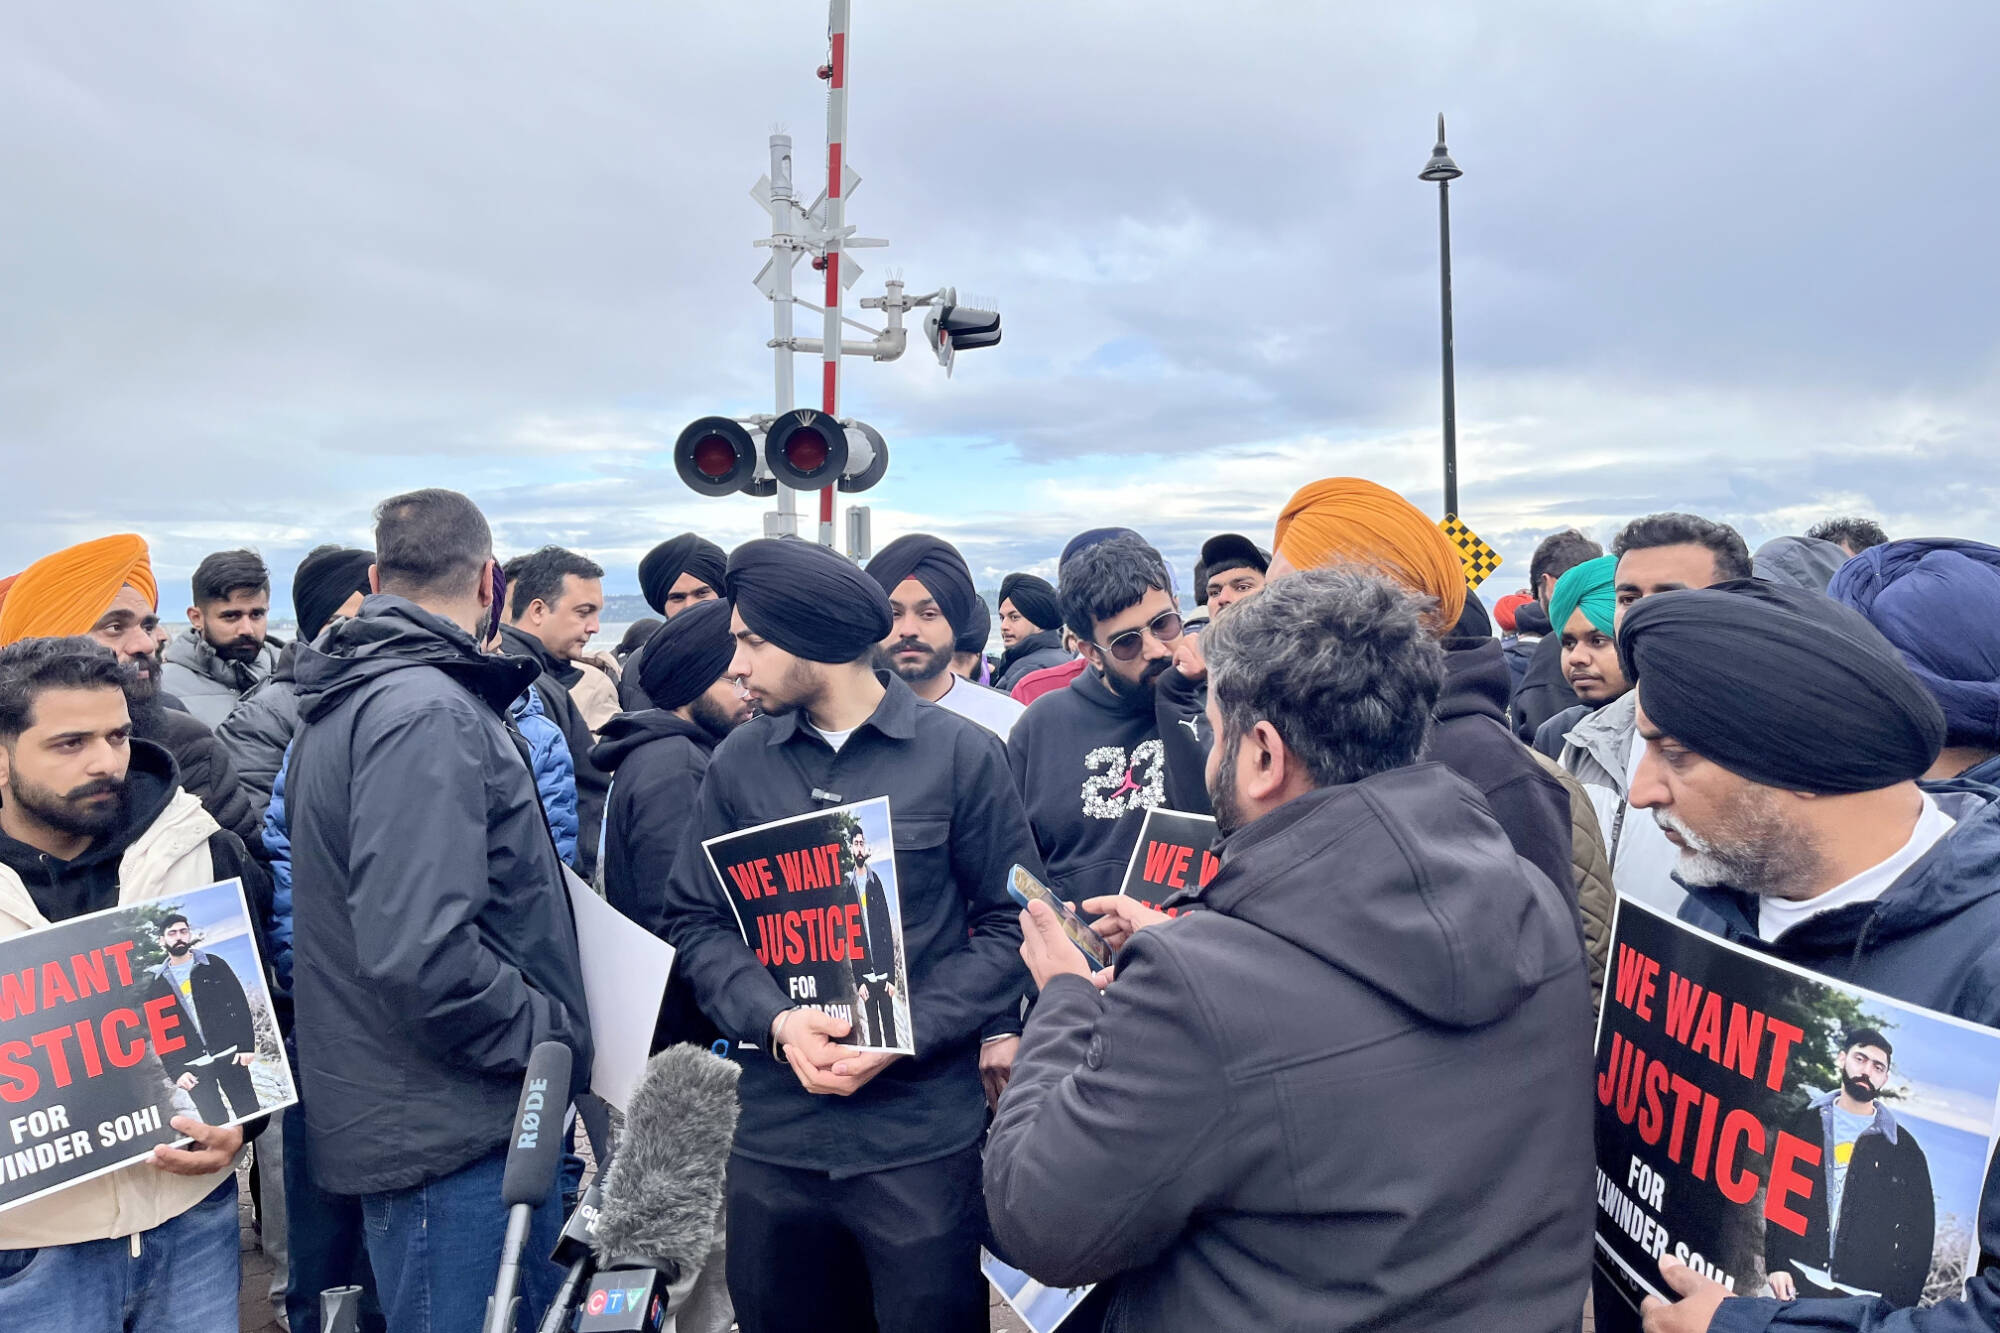 Police have made an arrest in relation to the fatal stabbing in White Rock April 23, which claimed the life of Kulwinder Singh Sohi. A vigil was held to honour his memory on Sunday night. (Tricia Weel photo)